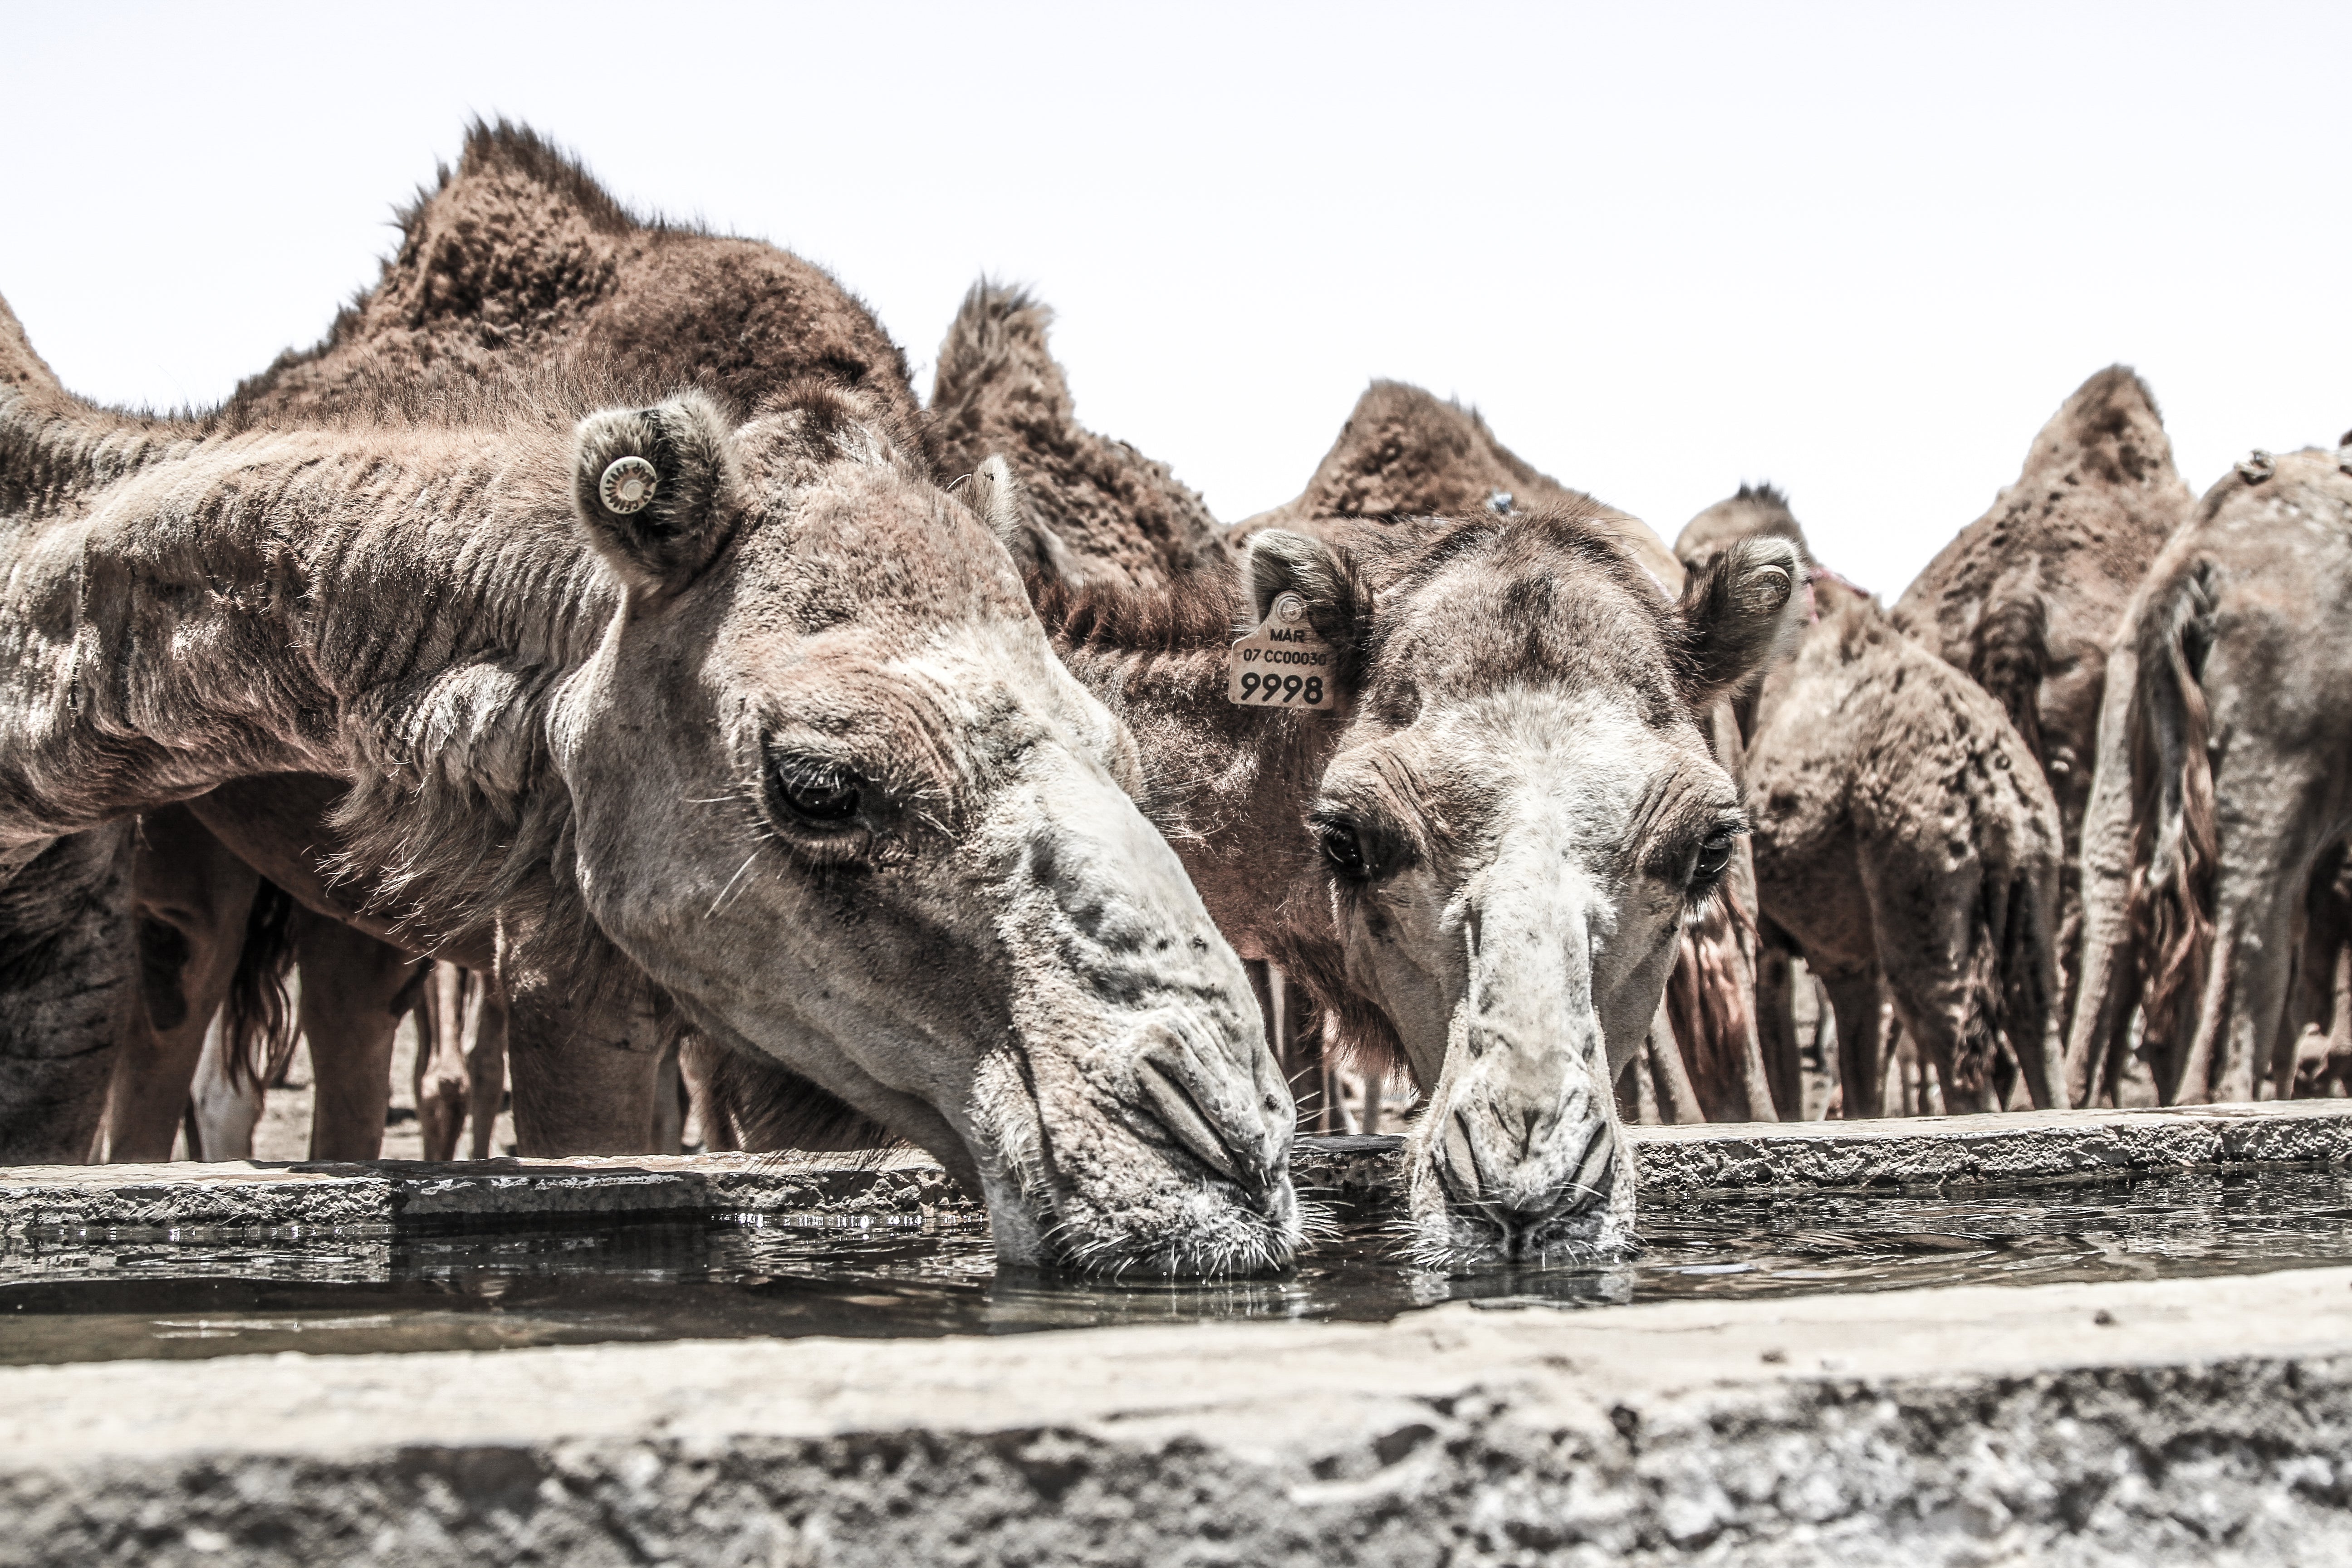 Thirsty camels